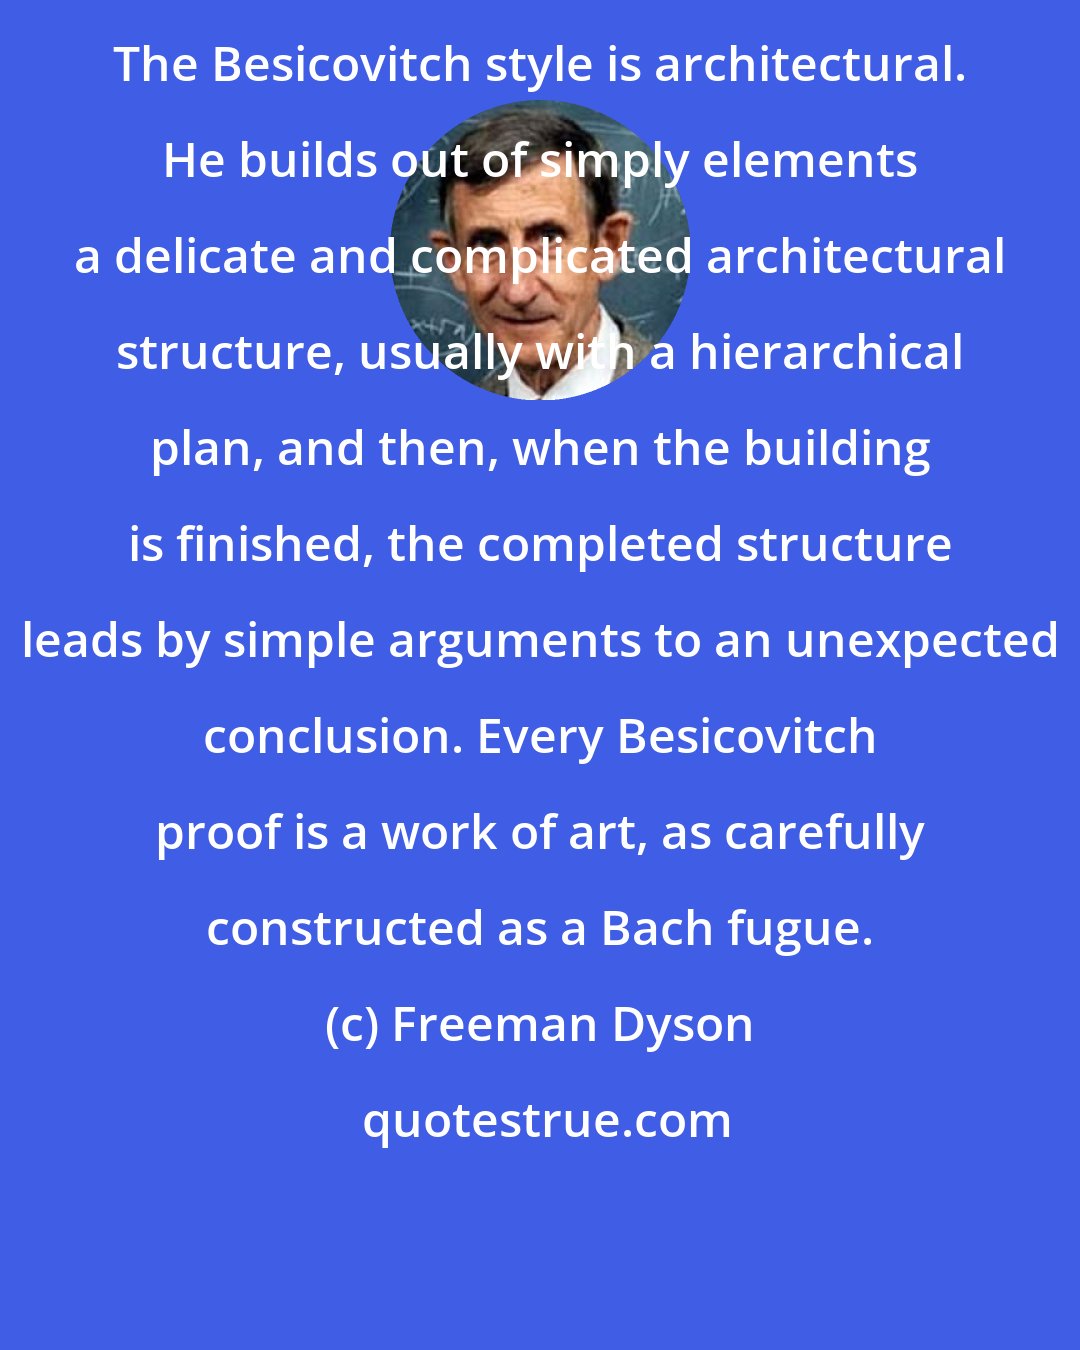 Freeman Dyson: The Besicovitch style is architectural. He builds out of simply elements a delicate and complicated architectural structure, usually with a hierarchical plan, and then, when the building is finished, the completed structure leads by simple arguments to an unexpected conclusion. Every Besicovitch proof is a work of art, as carefully constructed as a Bach fugue.